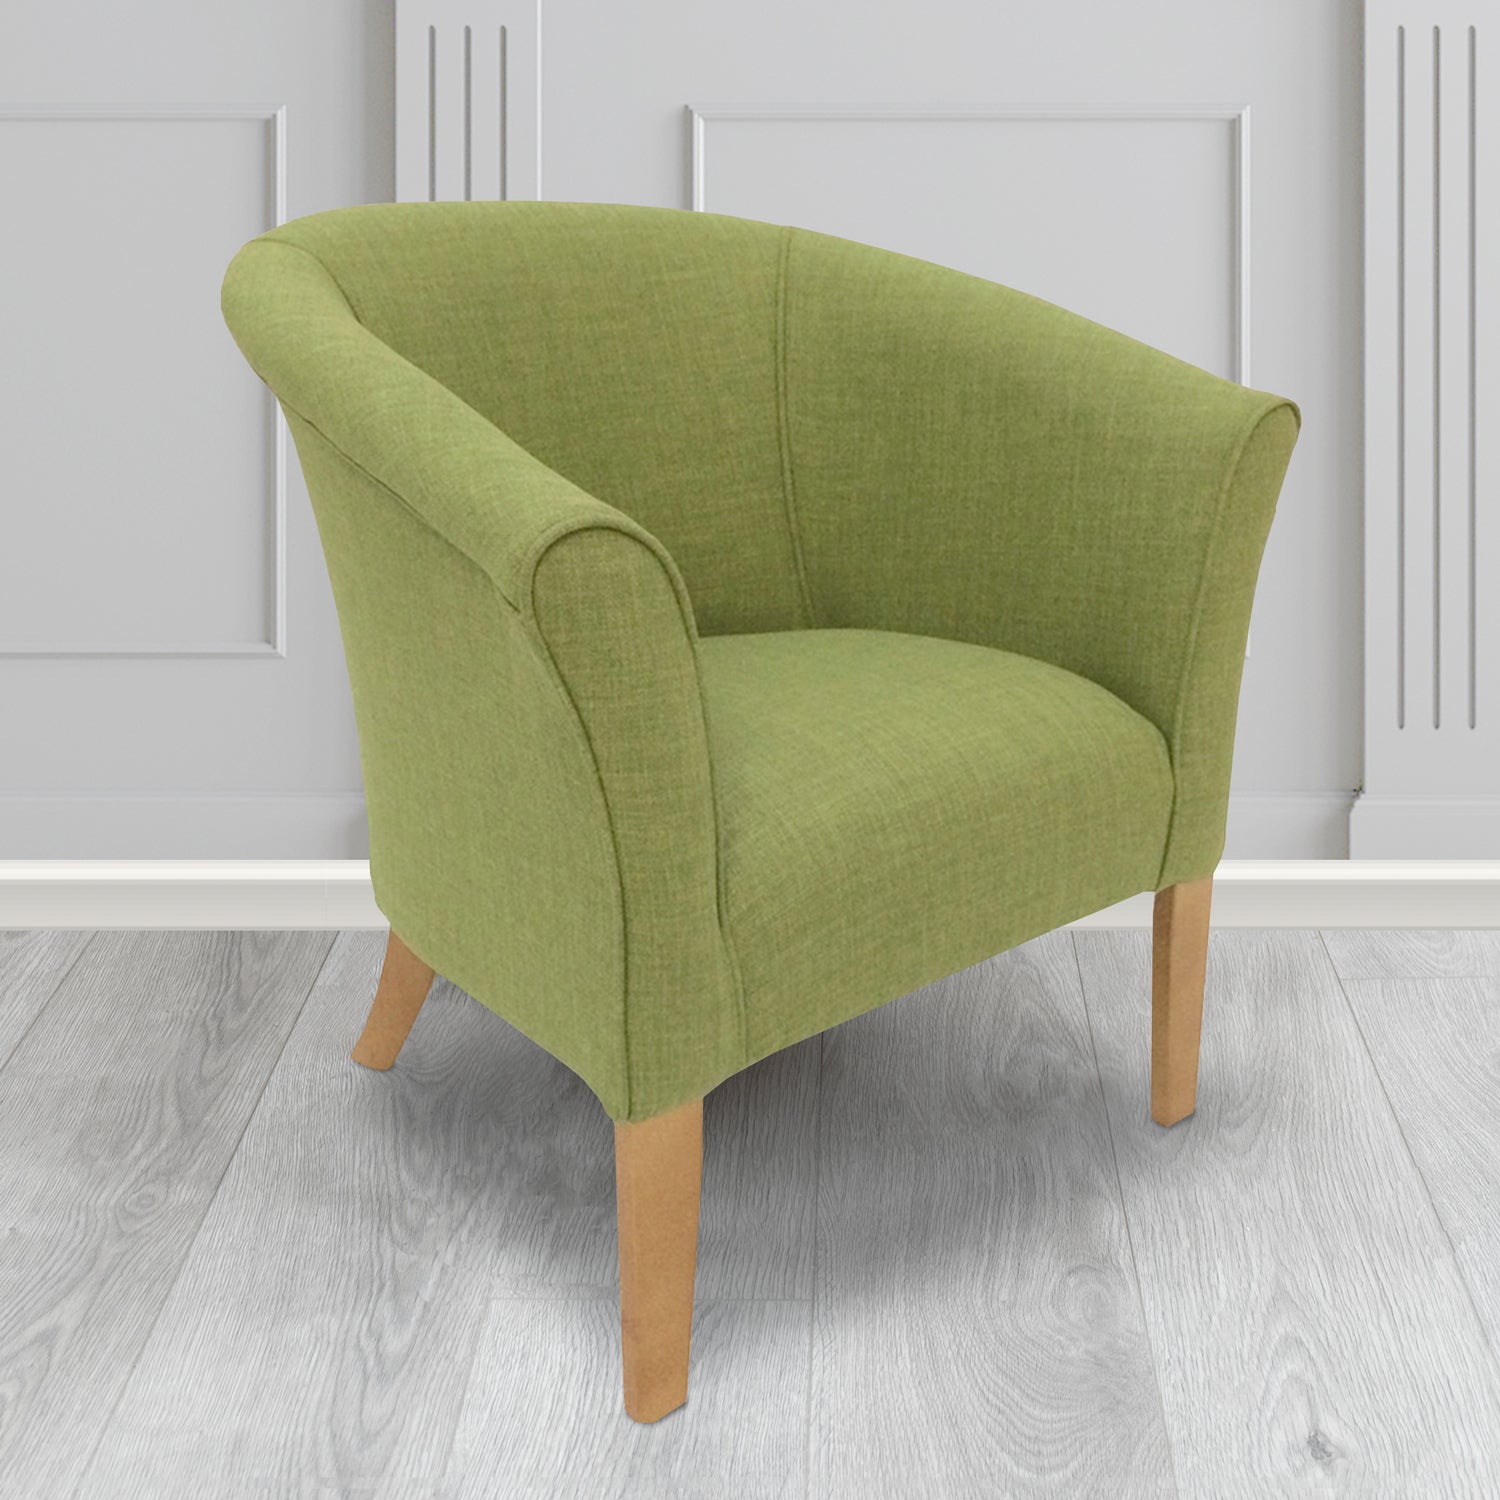 Quill Tub Chair in Linetta Lime Crib 5 Plain Fabric - Antimicrobial, Stain Resistant & Waterproof - The Tub Chair Shop